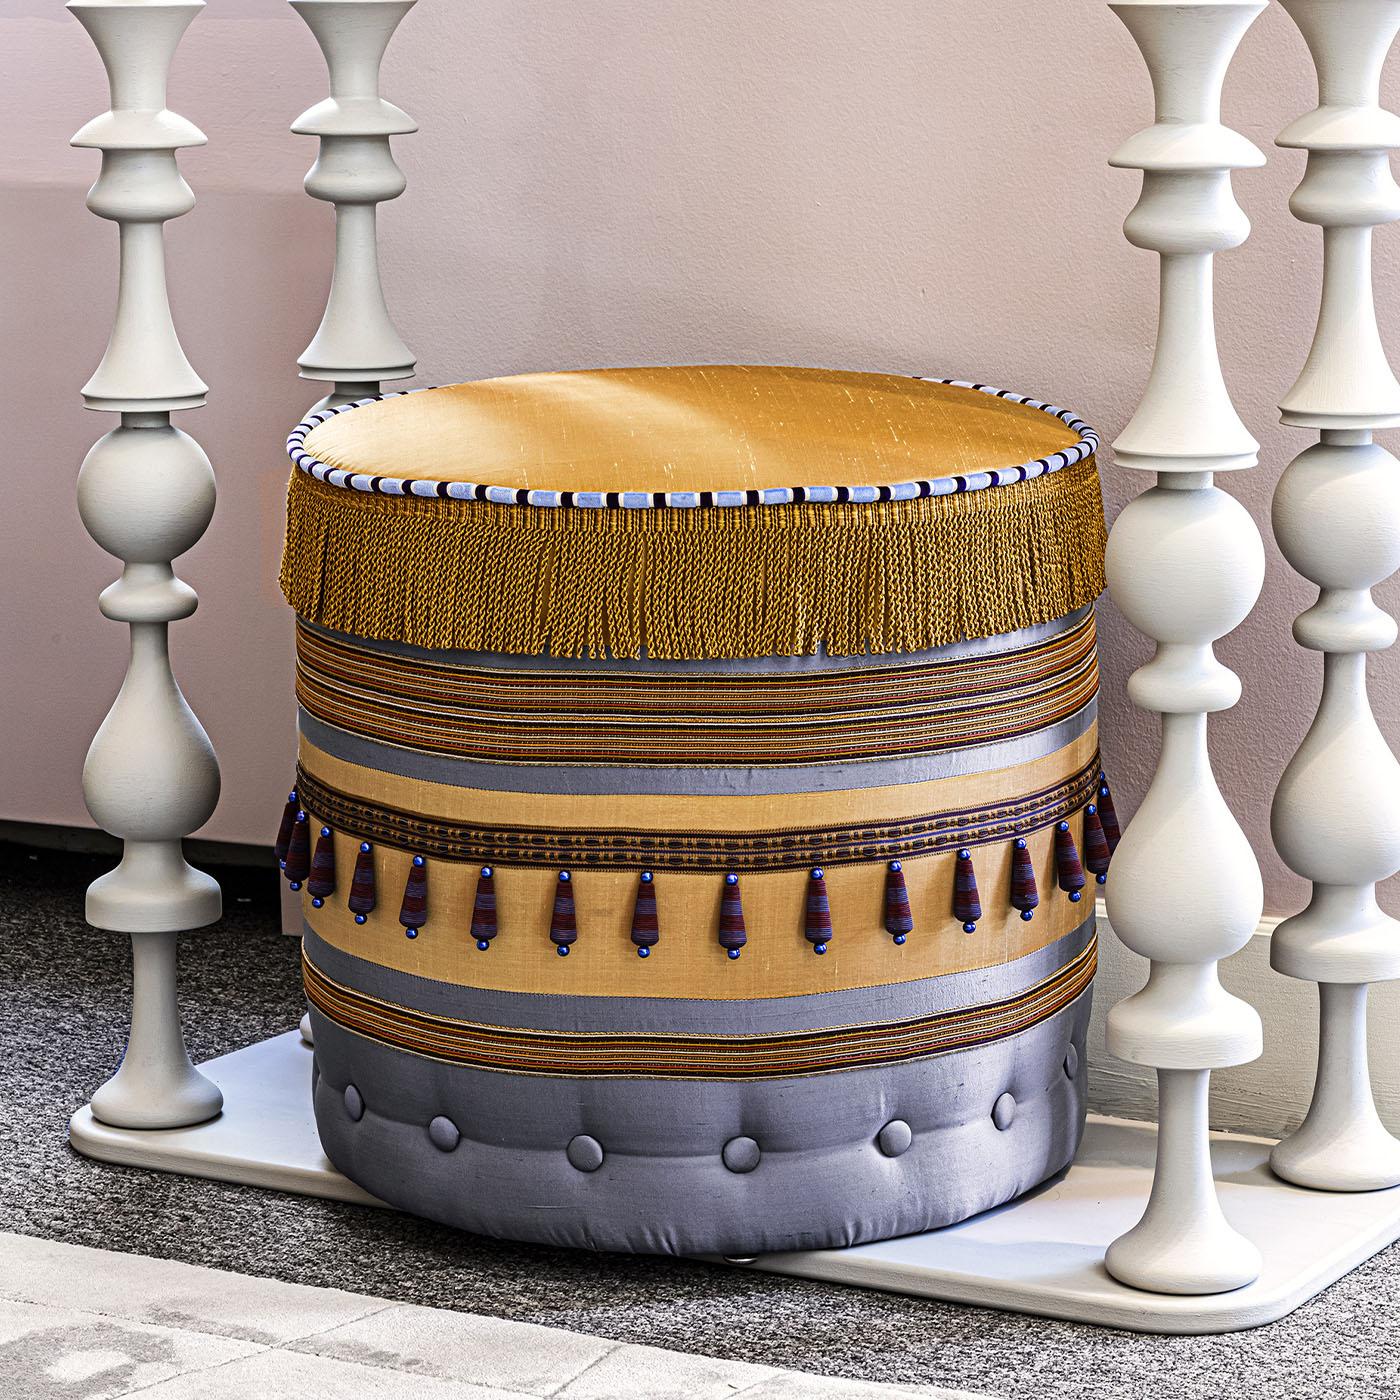 This handcrafted round pouf with patchwork design exemplifies exquisite artistry. Made of precious textiles brings a unique touch to any home décor.